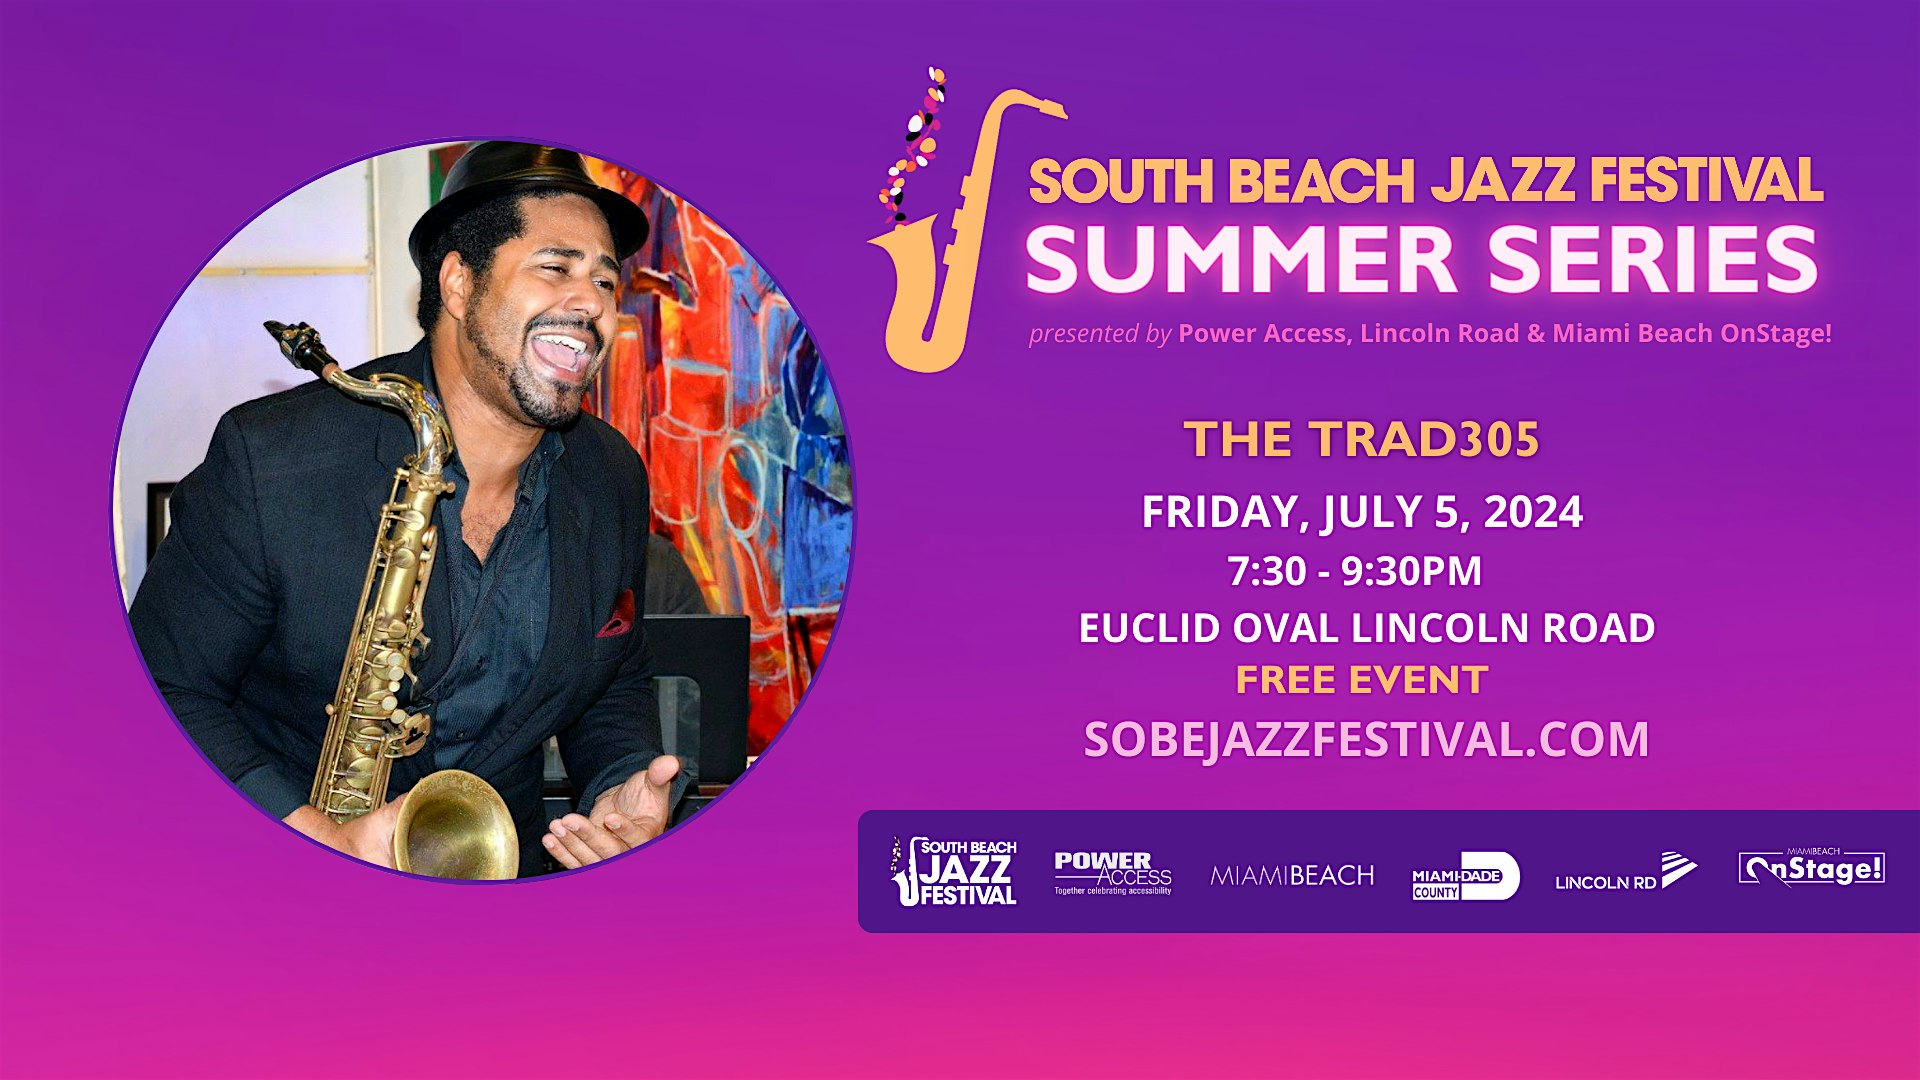 South Beach Jazz Summer Series: A Night with The Trad305